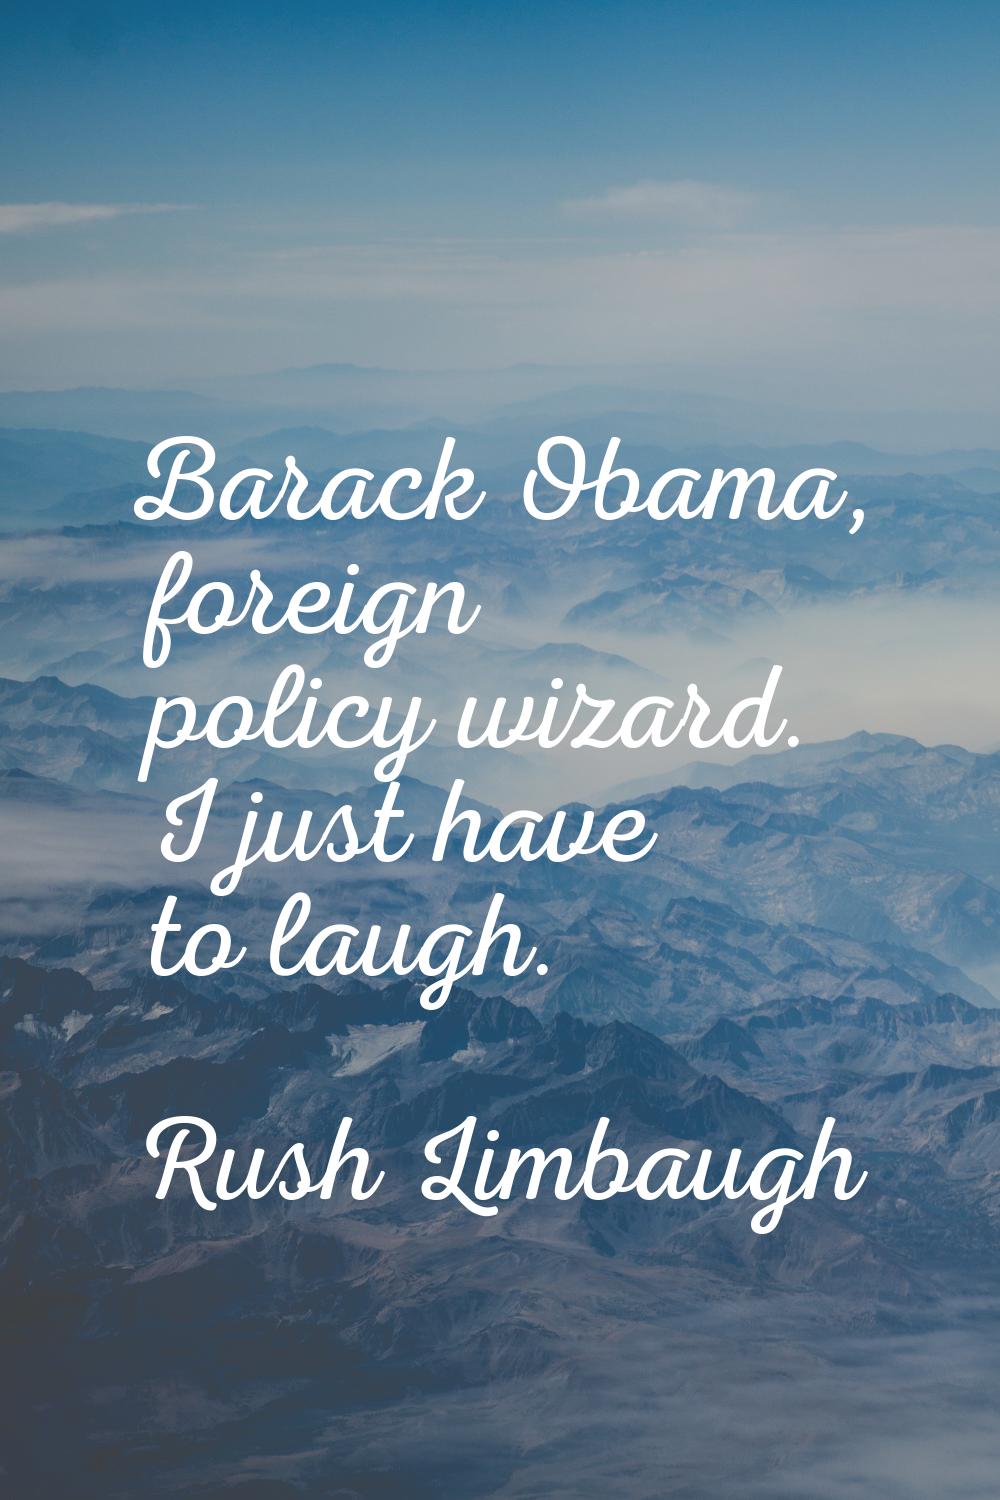 Barack Obama, foreign policy wizard. I just have to laugh.